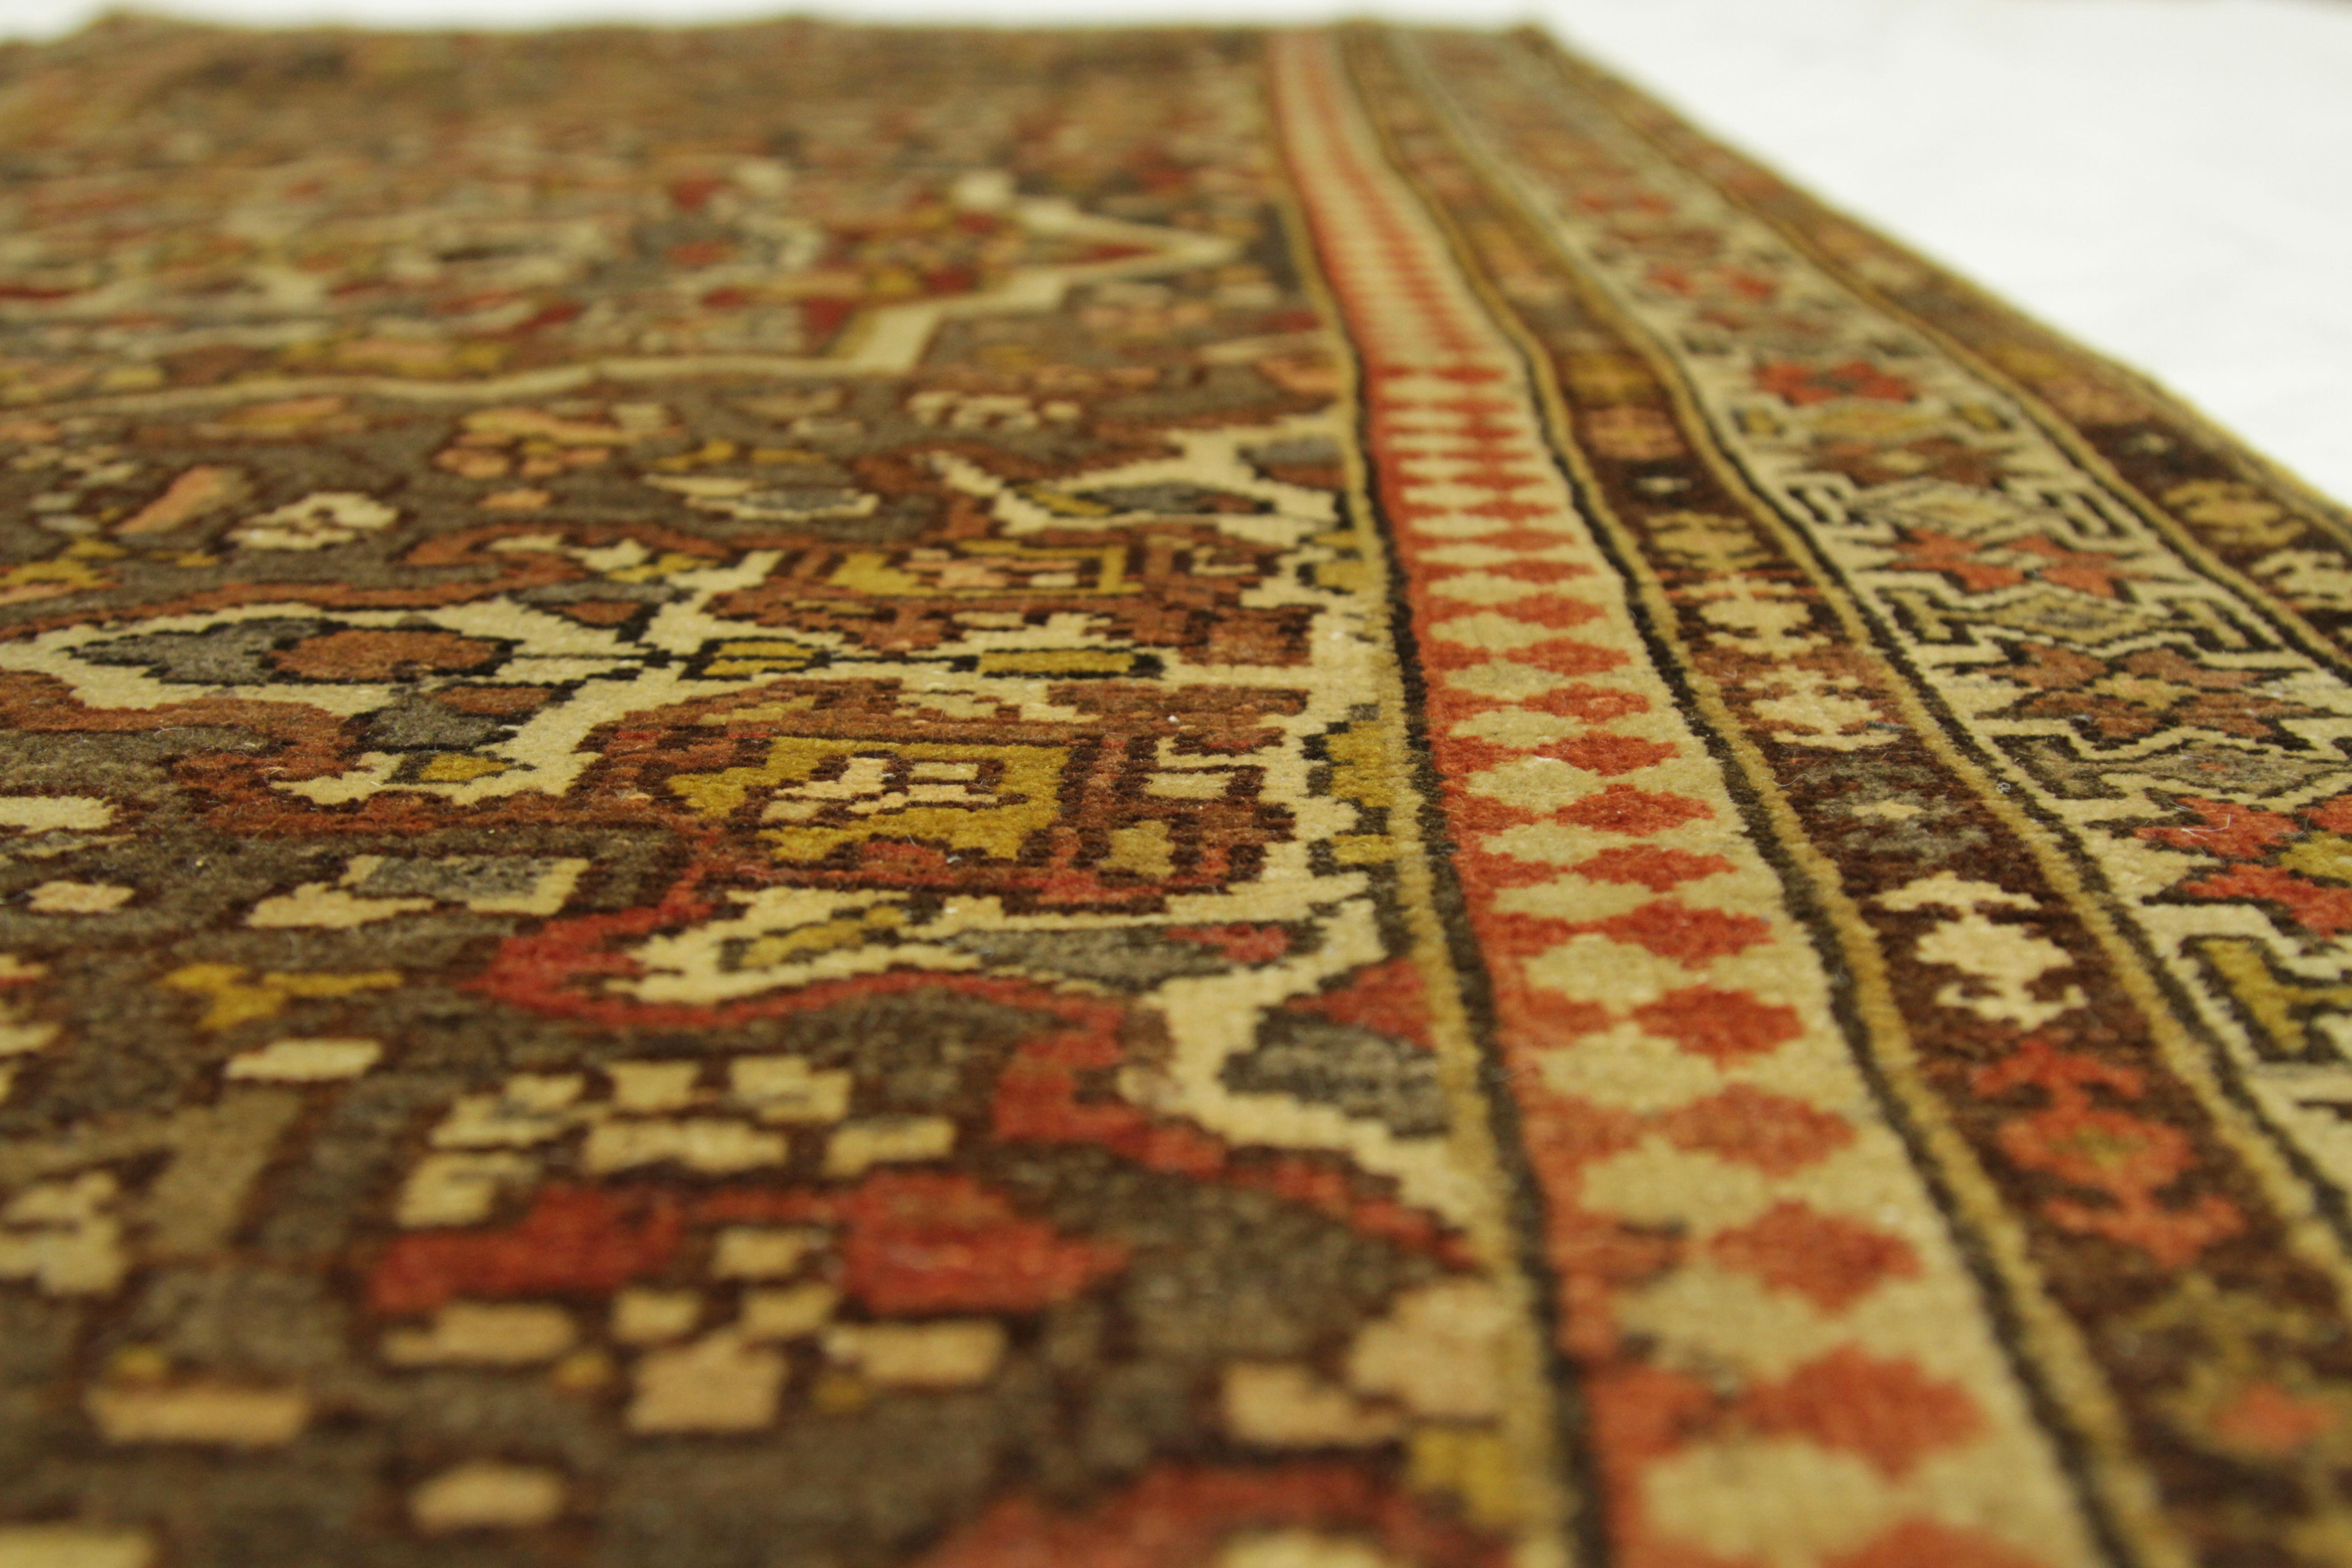 Wool Antique Persian Rug Bakhtiari Design with Ornate Floral Patterns, circa 1940s For Sale